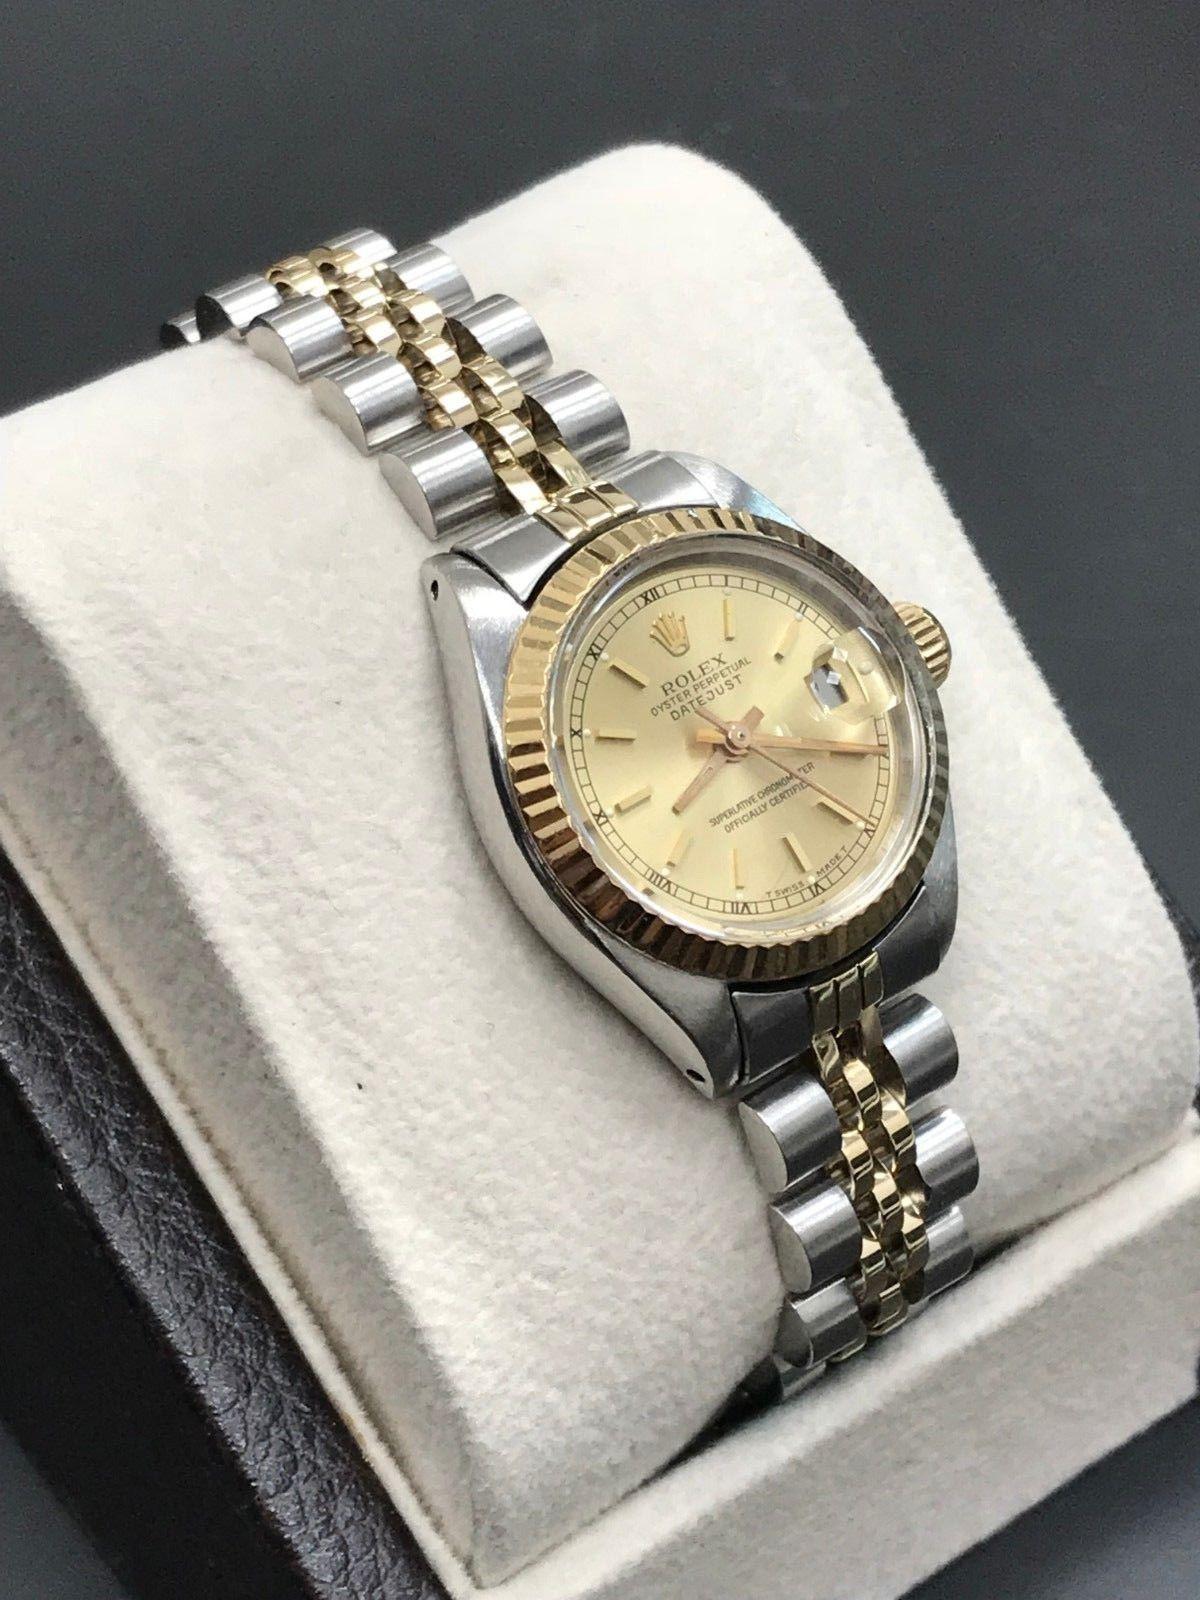 Style Number: 6916
Serial: 5430***
Model: Datejust
Case Material: Stainless Steel
Band: 18K Yellow Gold & Stainless Steel 
Bezel: 18K Yellow Gold 
Dial: Champagne 
Face: Acrylic 
Case Size: 26mm
Includes: 
-Elegant Watch Box
-Certified Appraisal 
-6